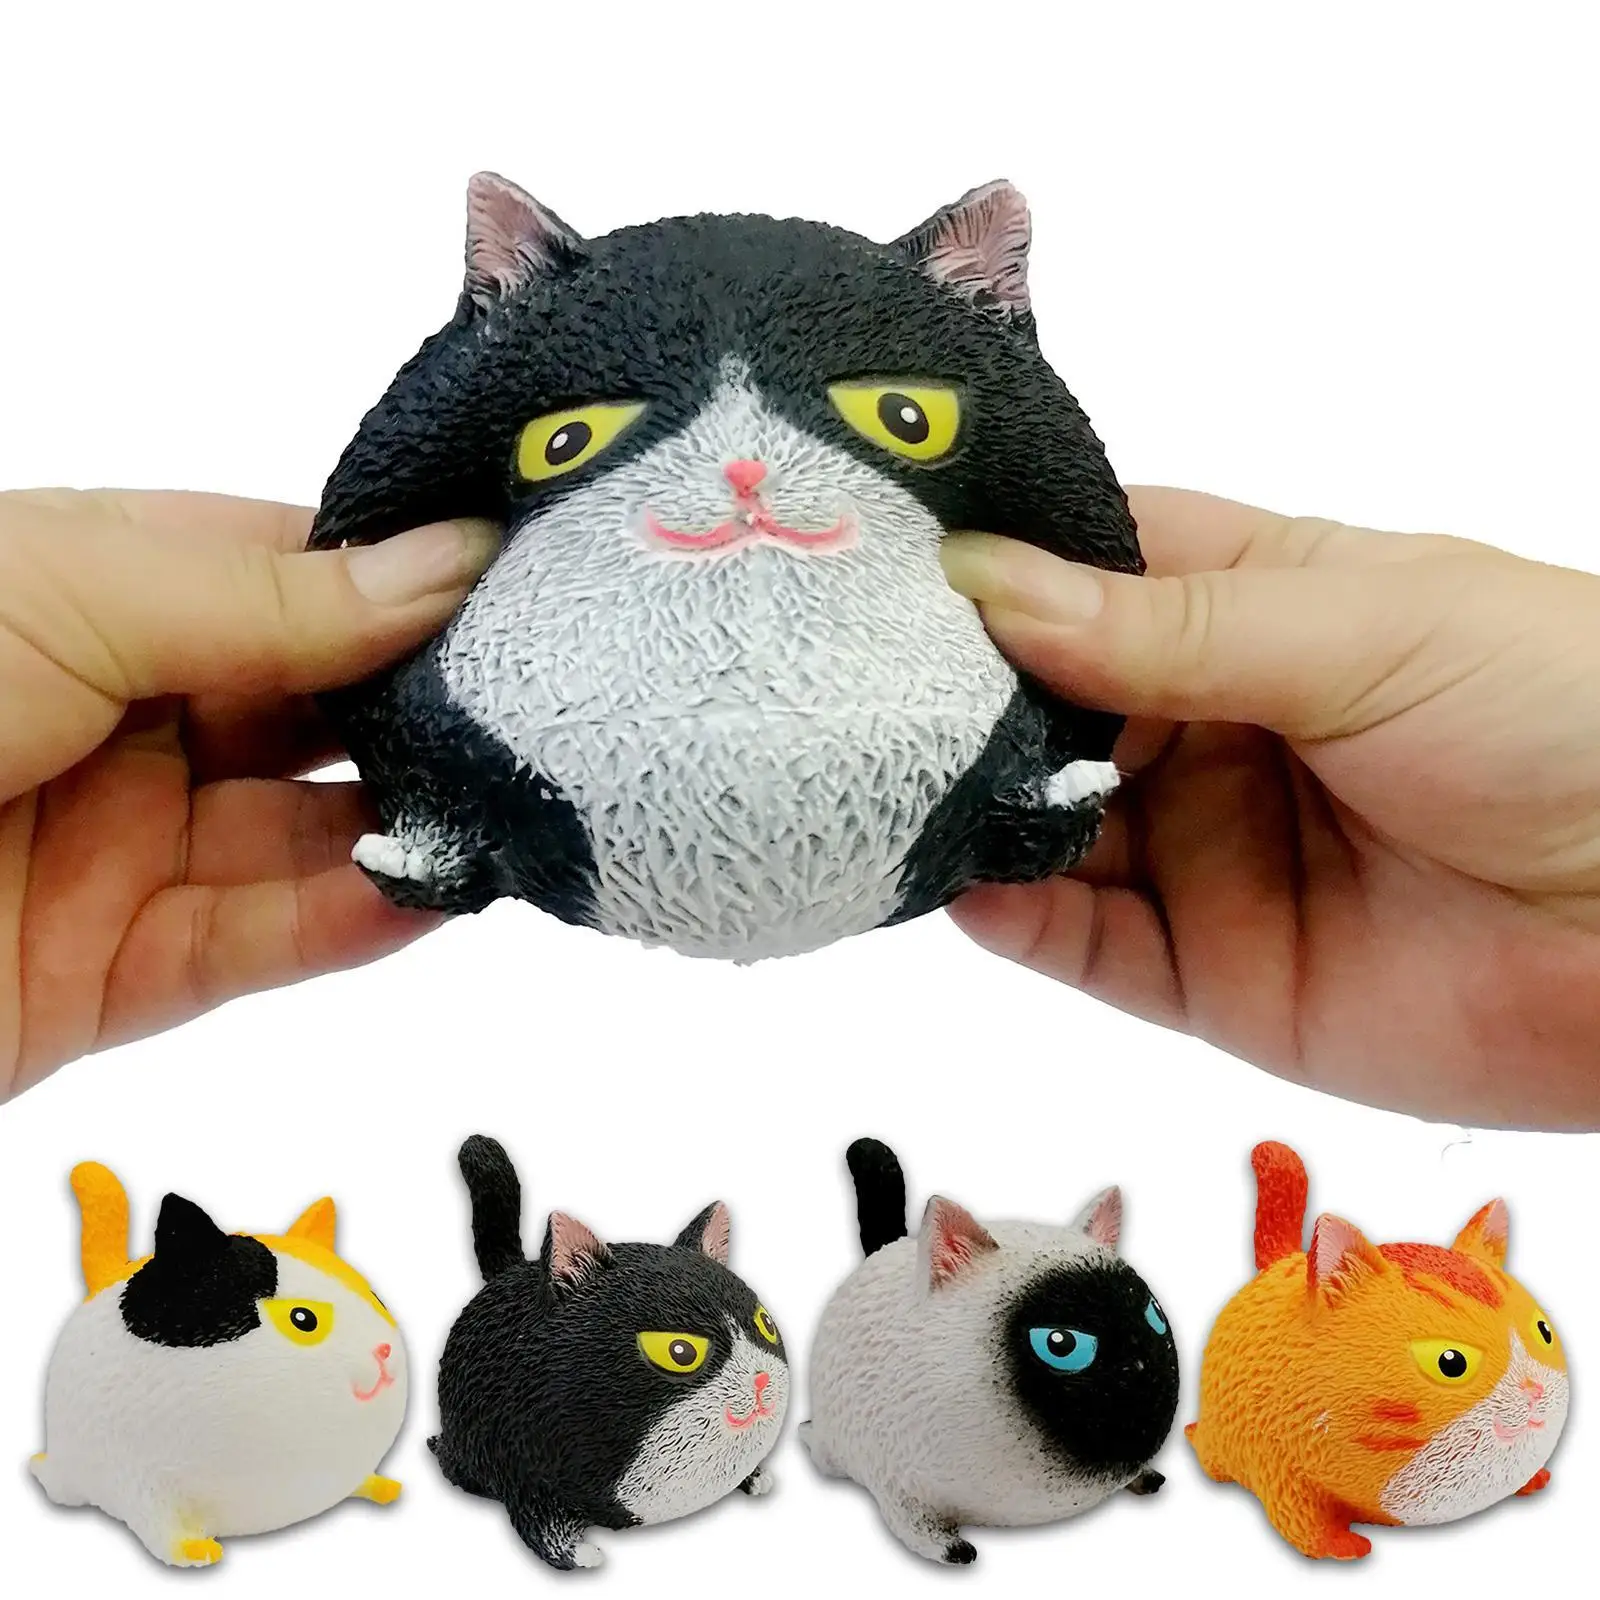 

Cute Pinch Angry Cat Pet Toy Decompression Toy Cat Shaped Squeeze Stress Relief Ball Decompression Artifact Vent Toy Wholesale